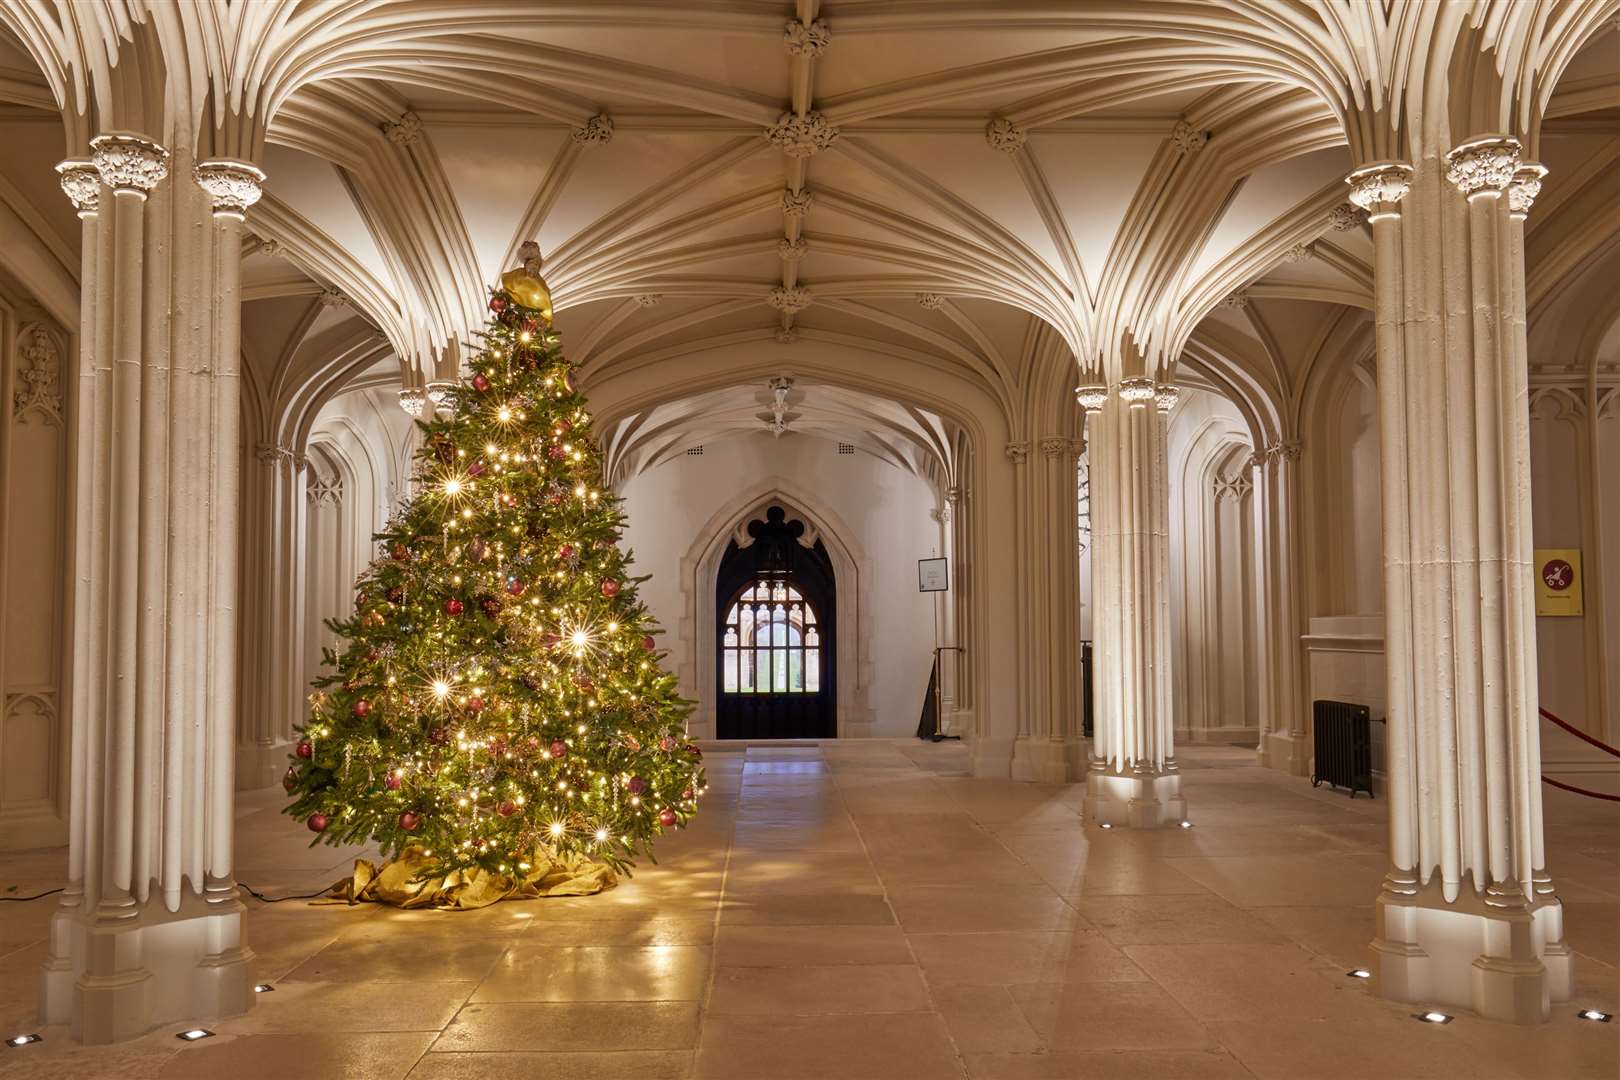 A Christmas tree in Windsor Castle’s Inner Hall (Royal Collection/Her Majesty Queen Elizabeth II 2020/PA)